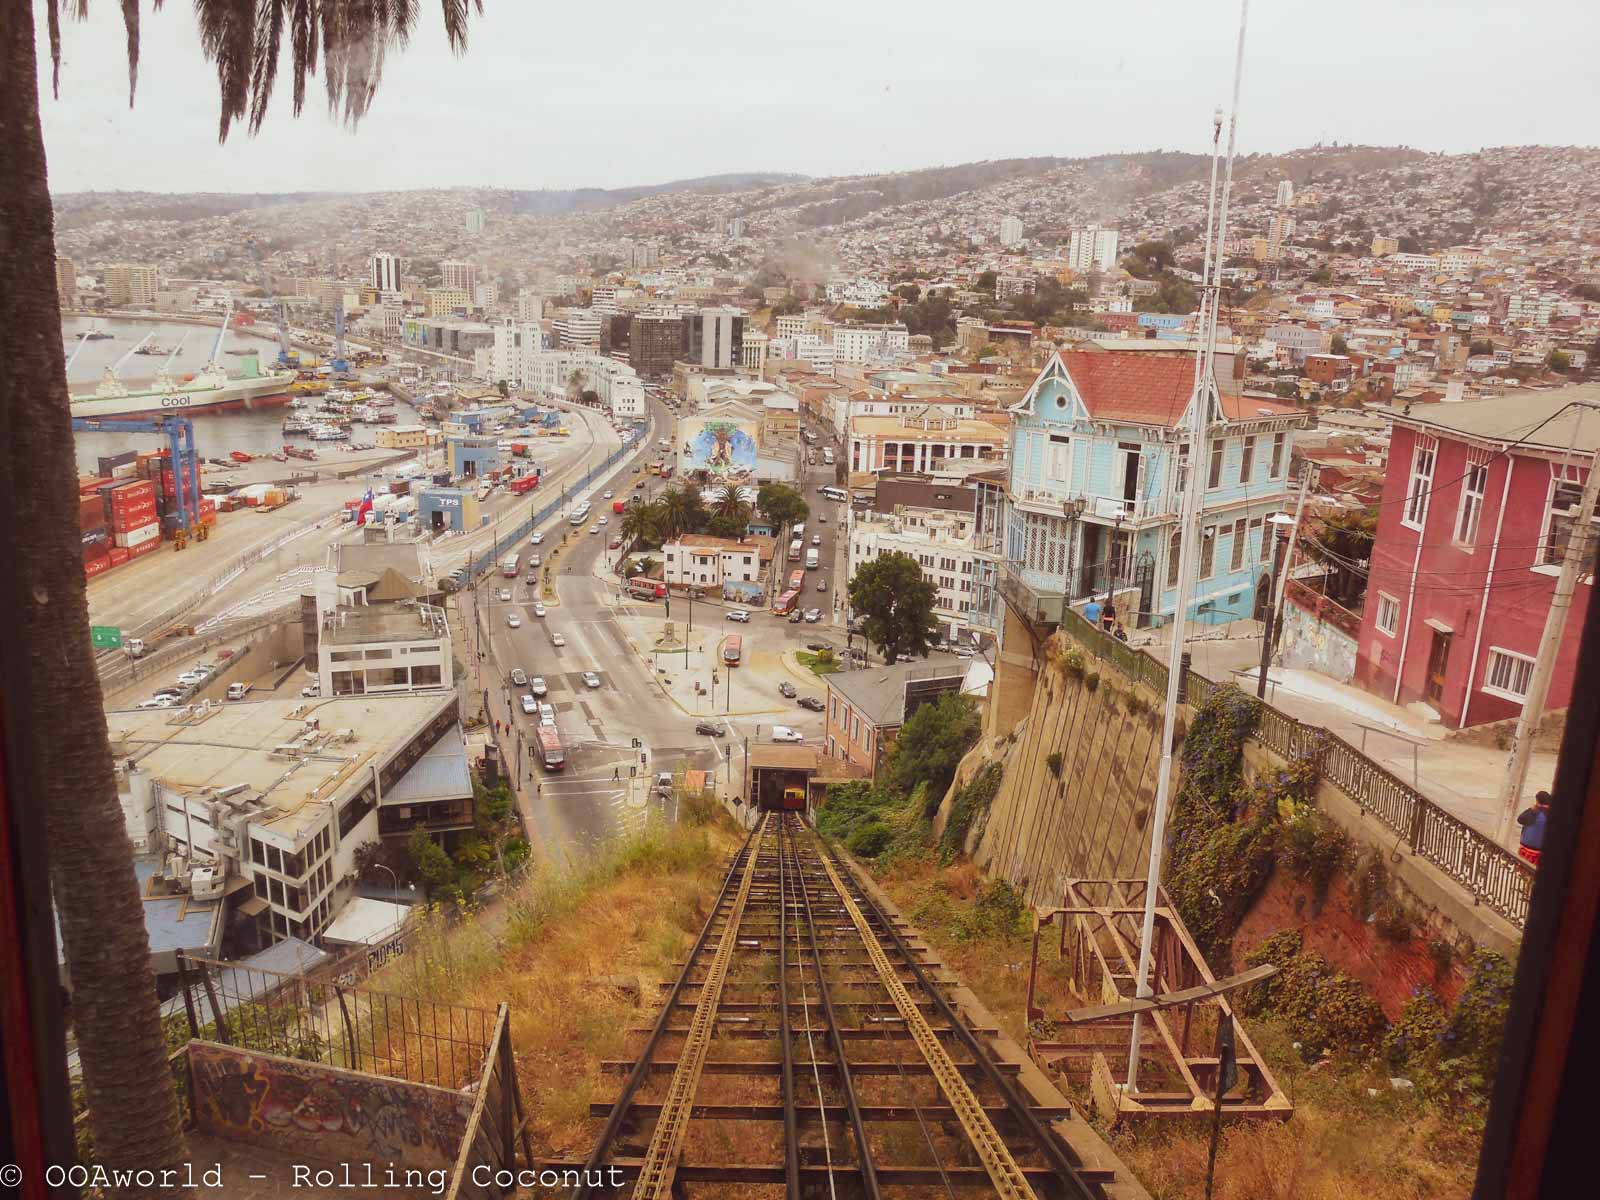 View of Ascensores and the city of Valparaiso, Chile - OOAworld Rolling Coconut